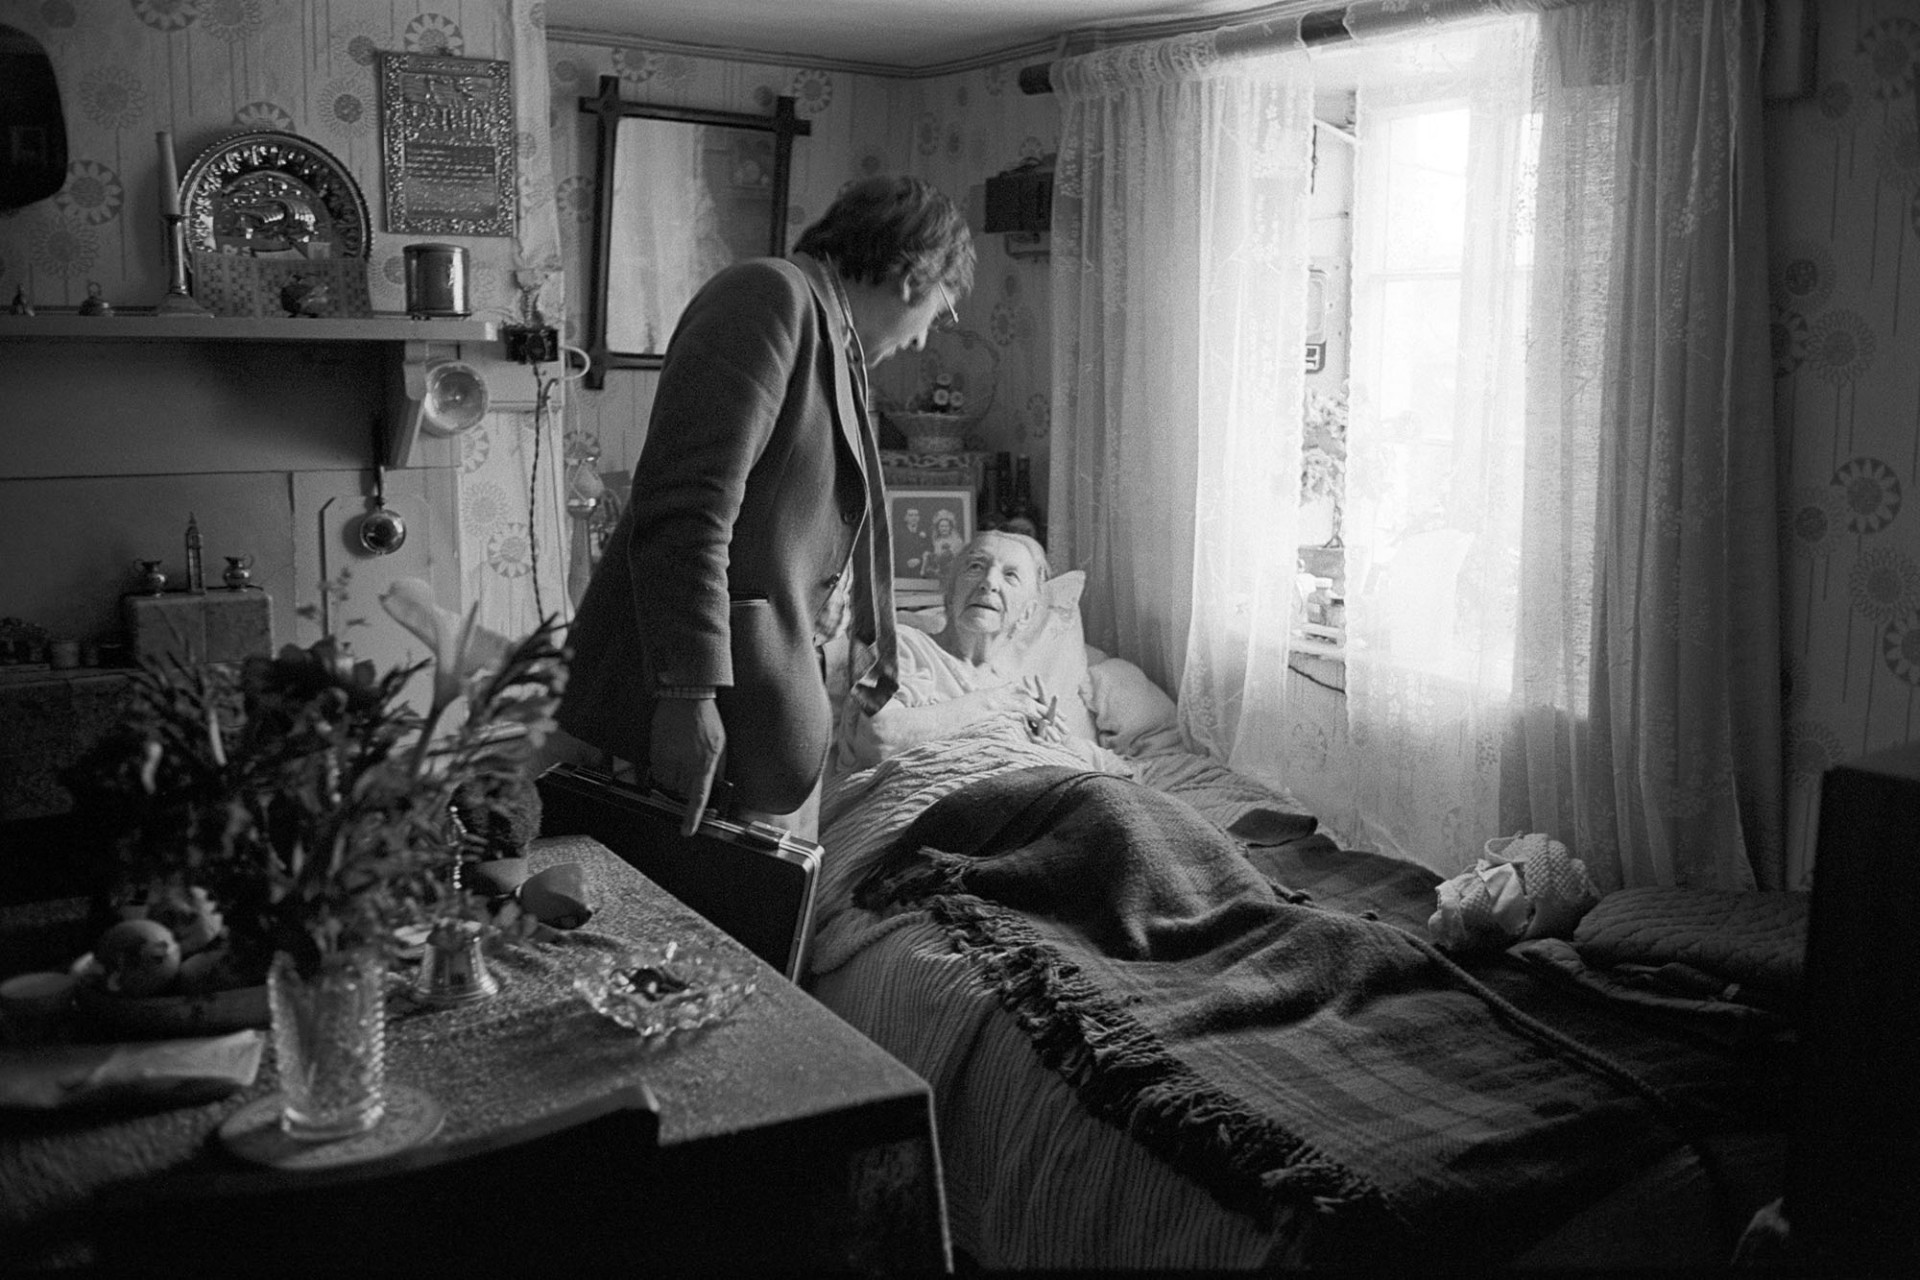 Doctor visiting elderly woman in bed, chatting. 
[Dr Paul Bangay talking to a woman in bed at her home in Langtree. Pictures and photographs are visible, as well as a vase of flowers on a table by her bed and ornaments on her mantelpiece.]